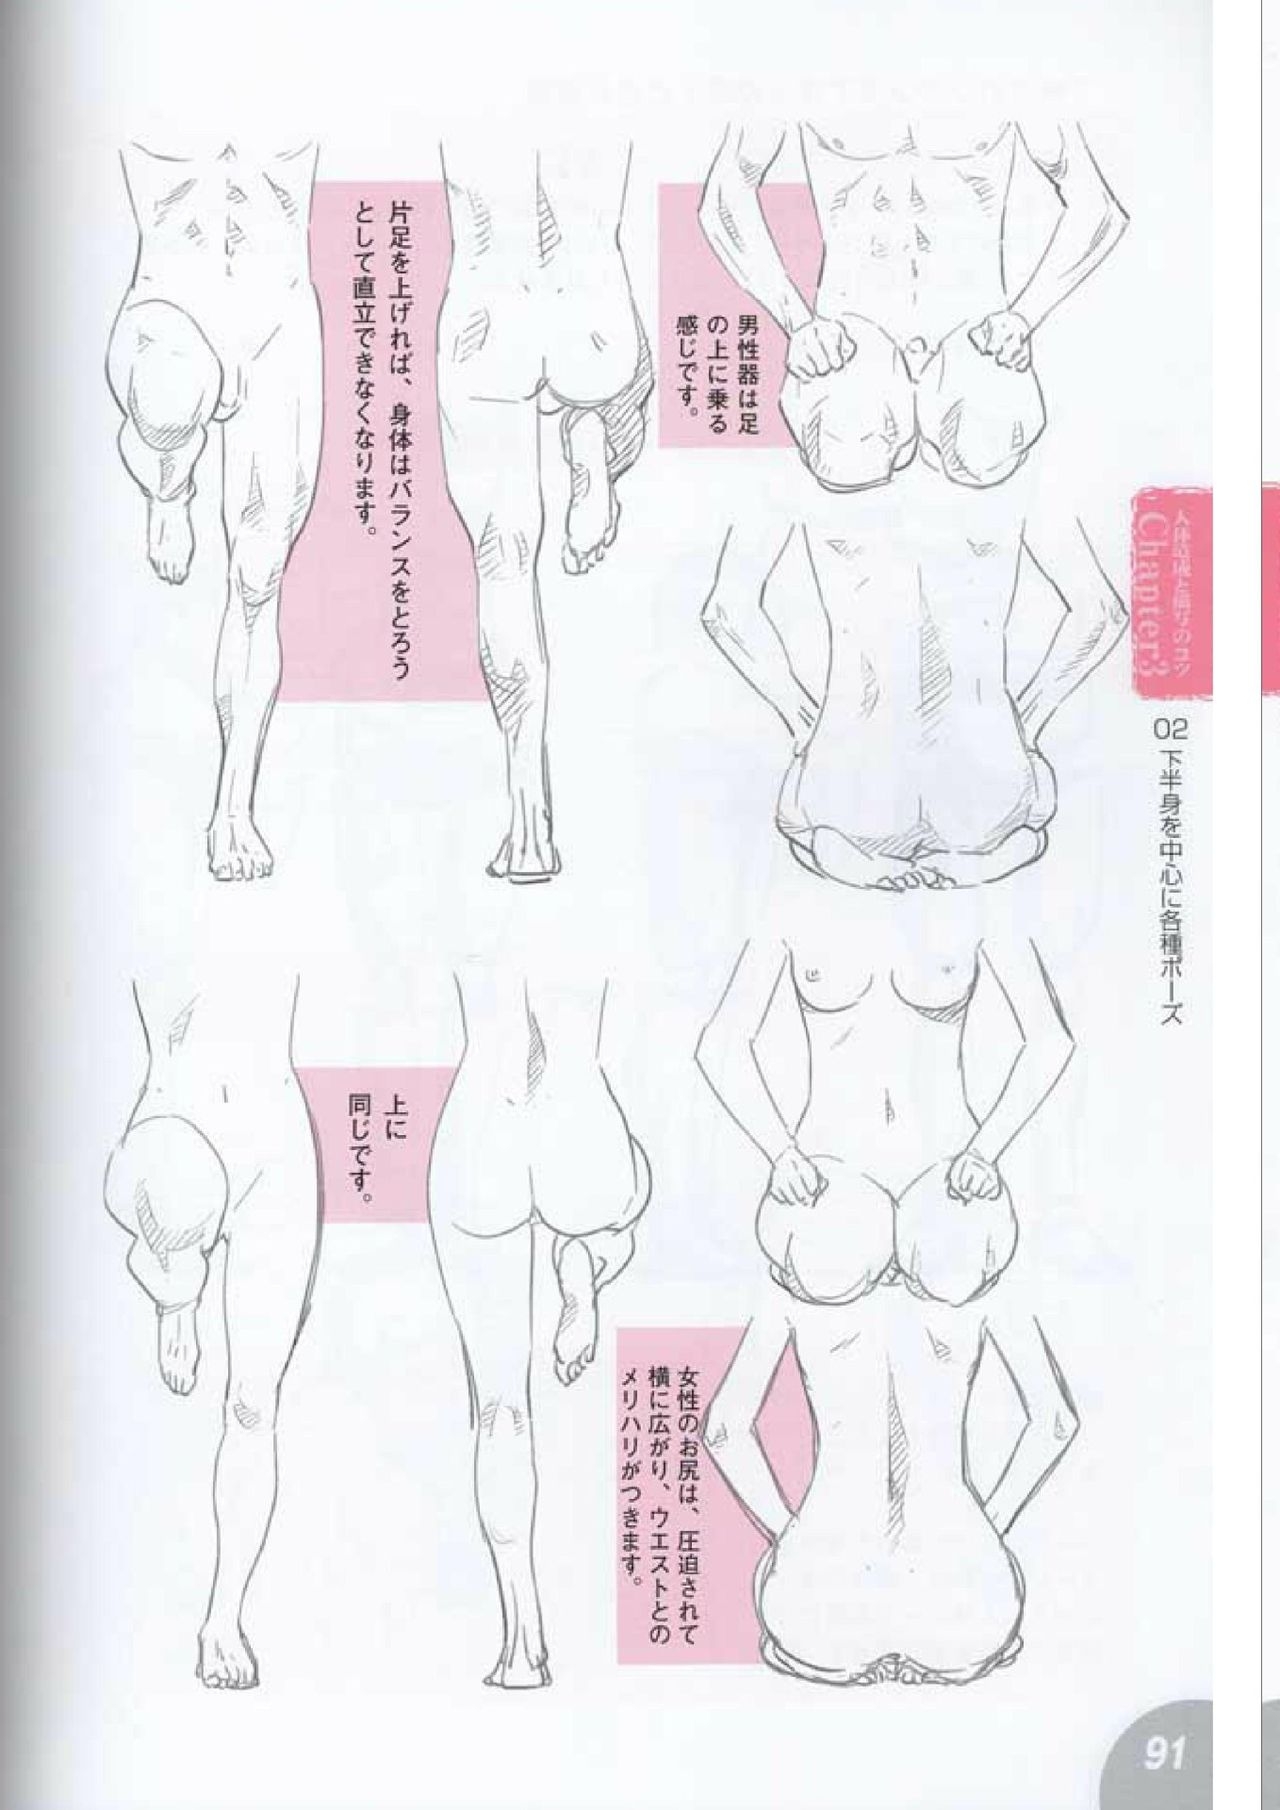 How to draw a character drawing from a human anatomical chart 89